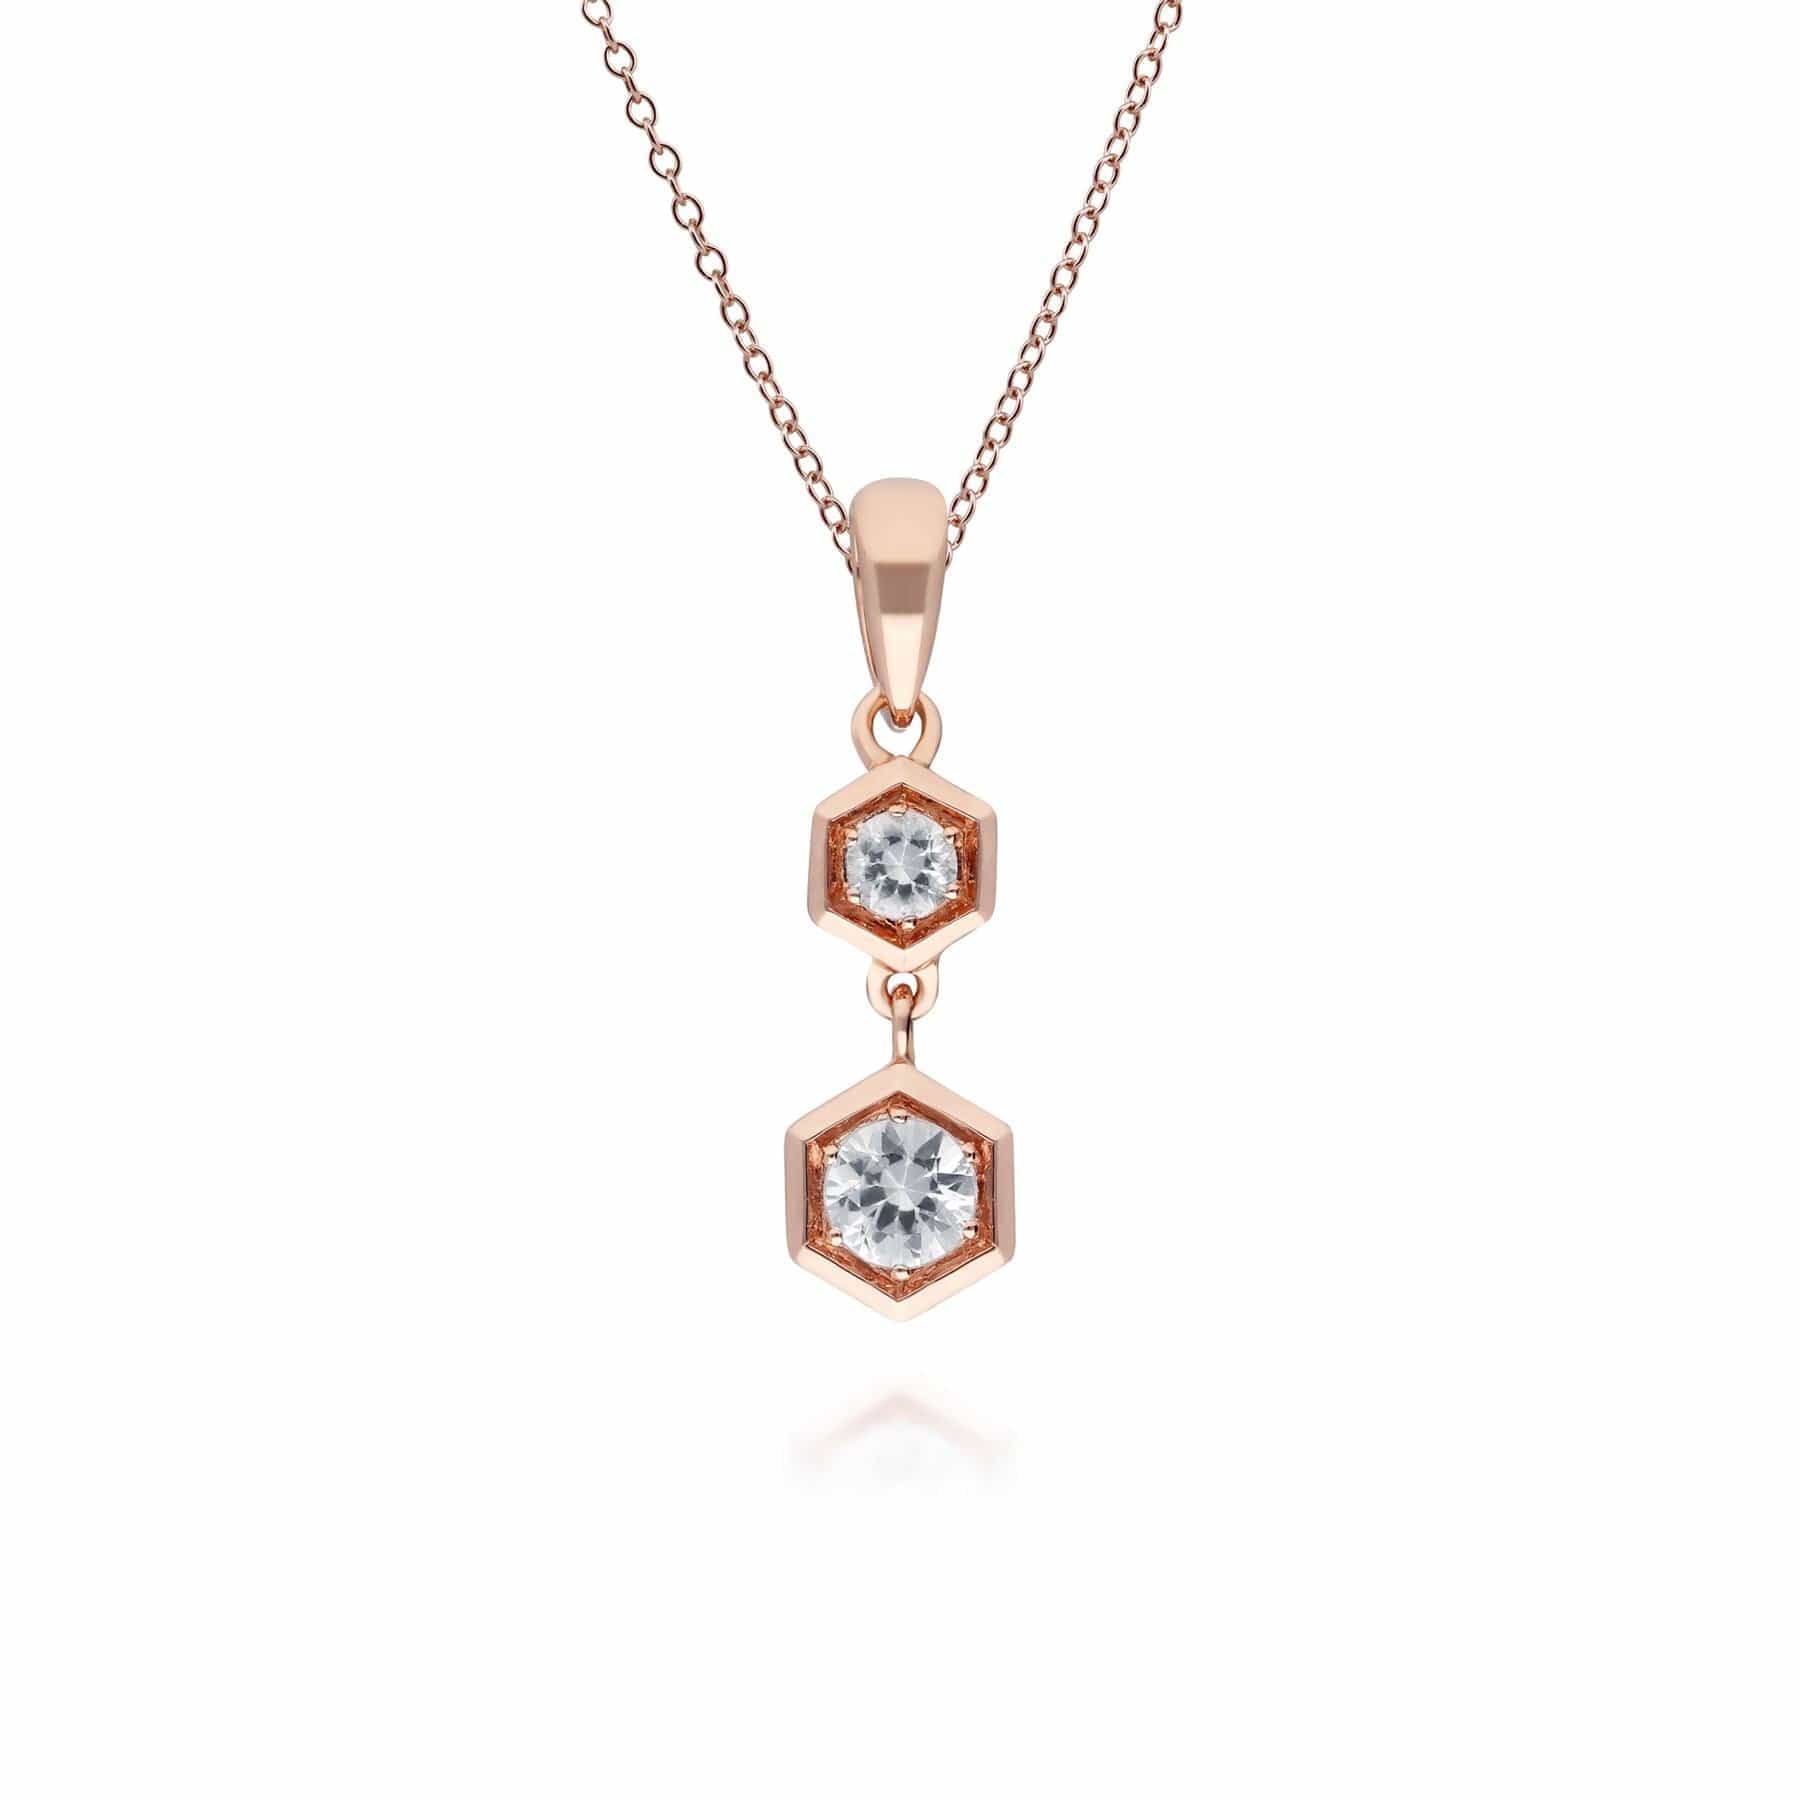 135P1964019 Honeycomb Inspired Clear Sapphire Pendant Necklace in 9ct Rose Gold 1